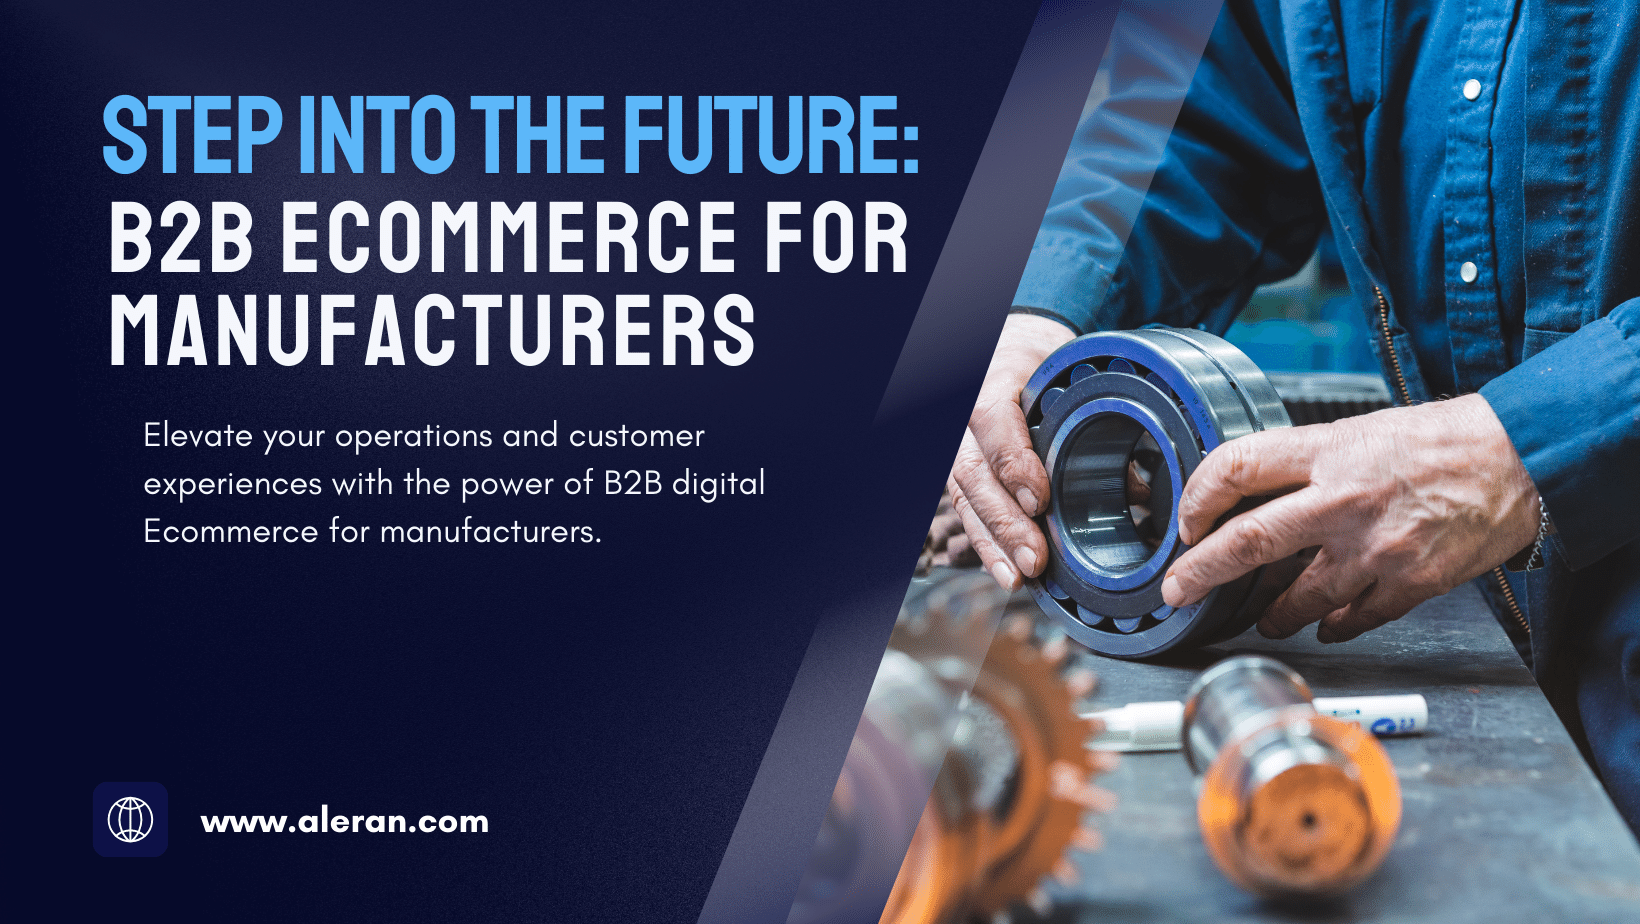 B2B Ecommerce for Manufacturers